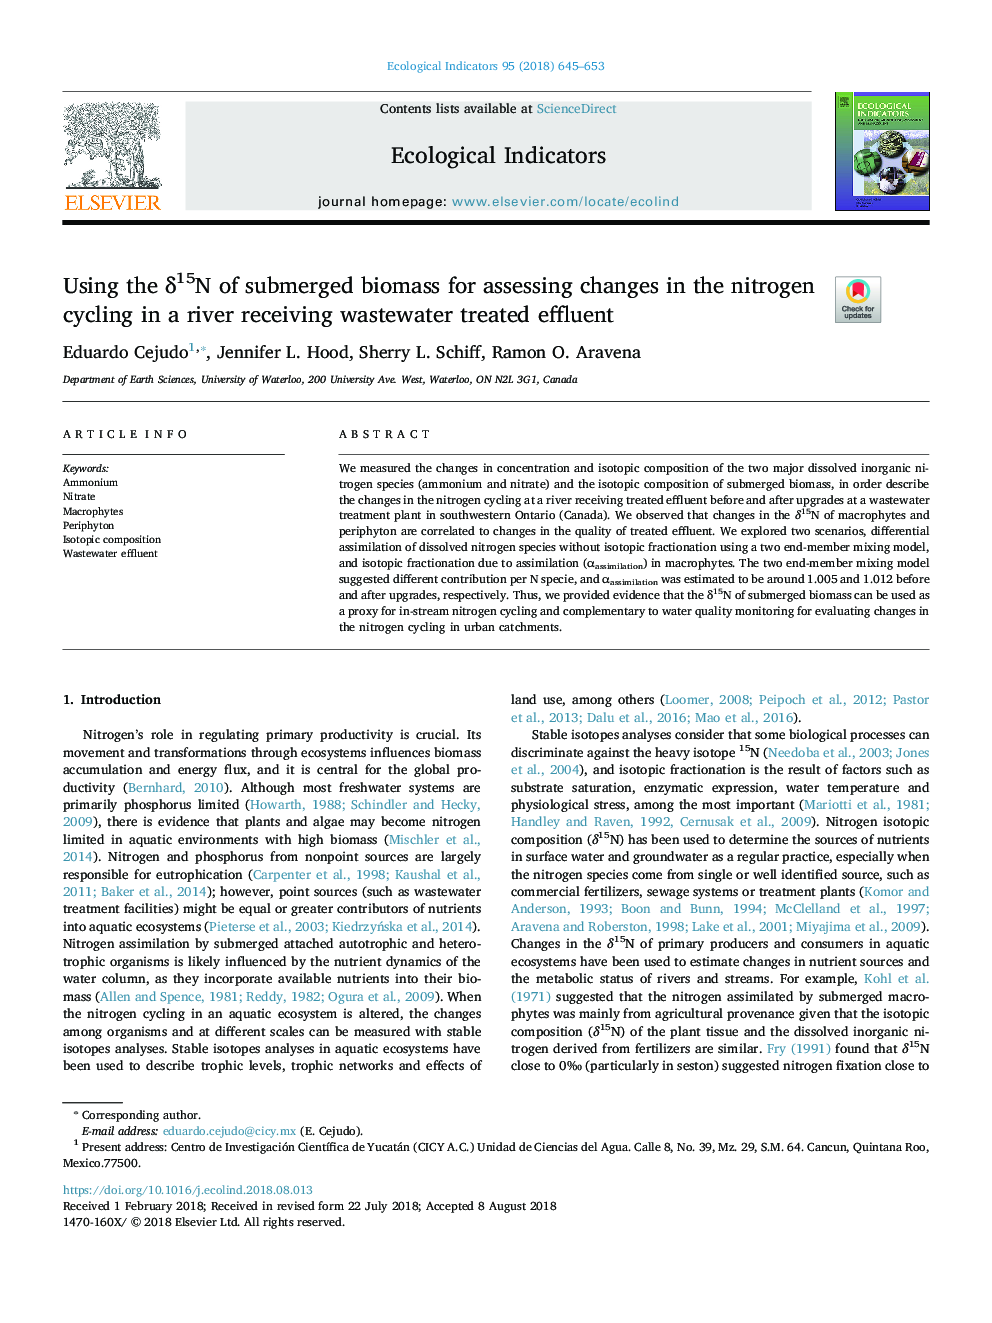 Using the Î´15N of submerged biomass for assessing changes in the nitrogen cycling in a river receiving wastewater treated effluent